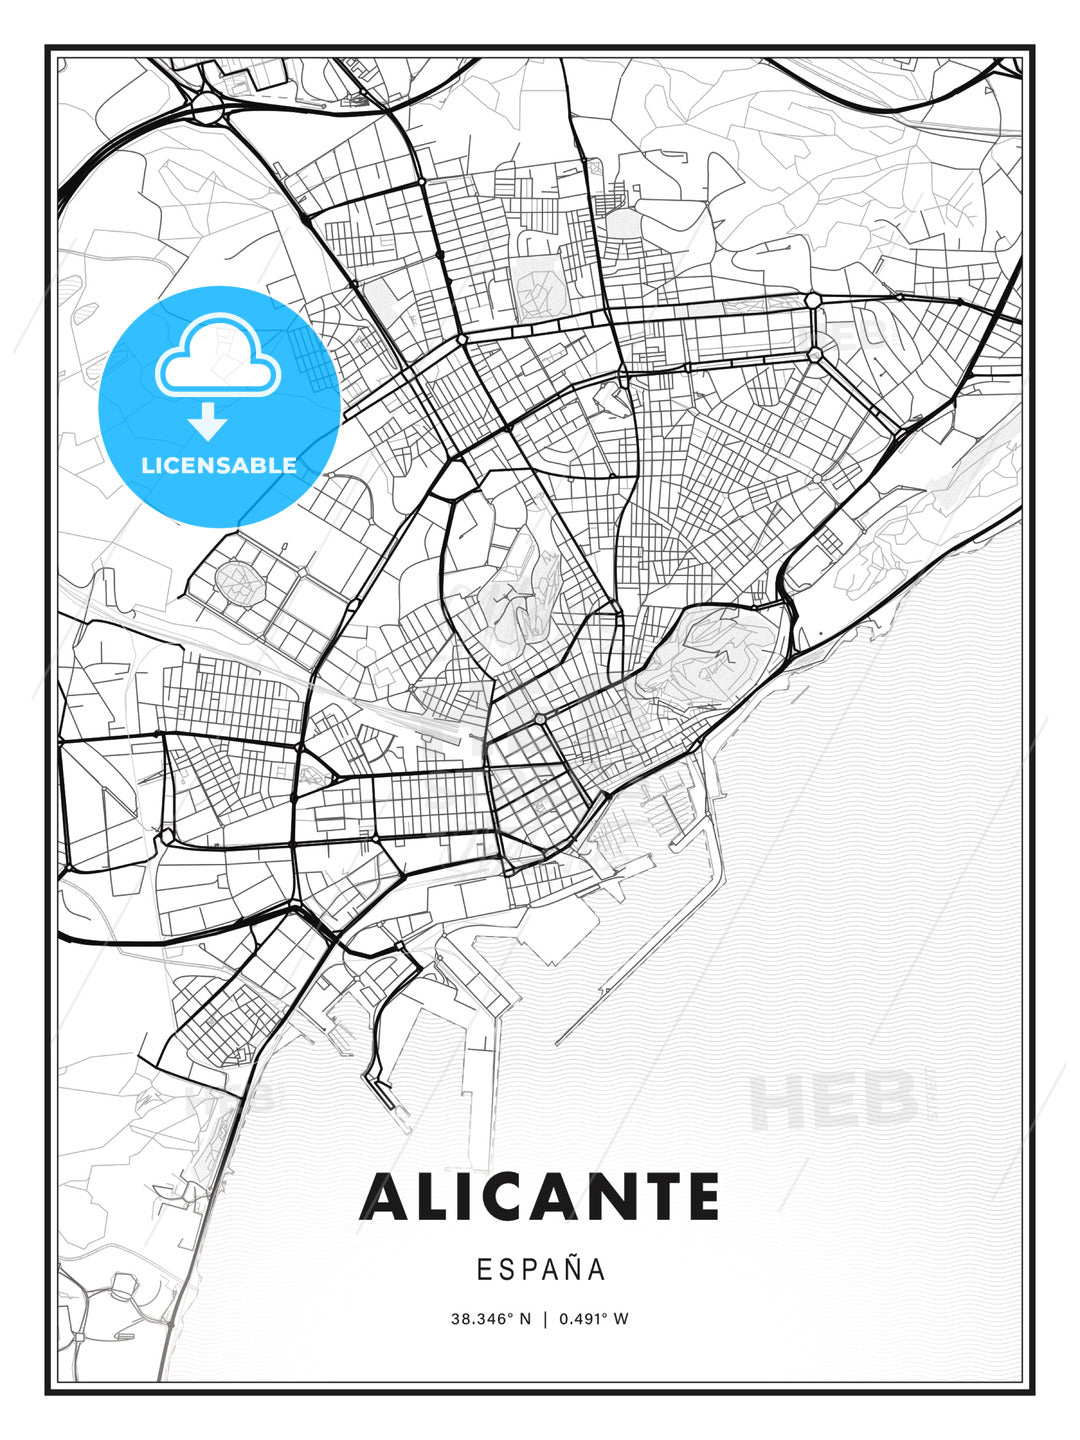 Alicante, Spain, Modern Print Template in Various Formats - HEBSTREITS Sketches